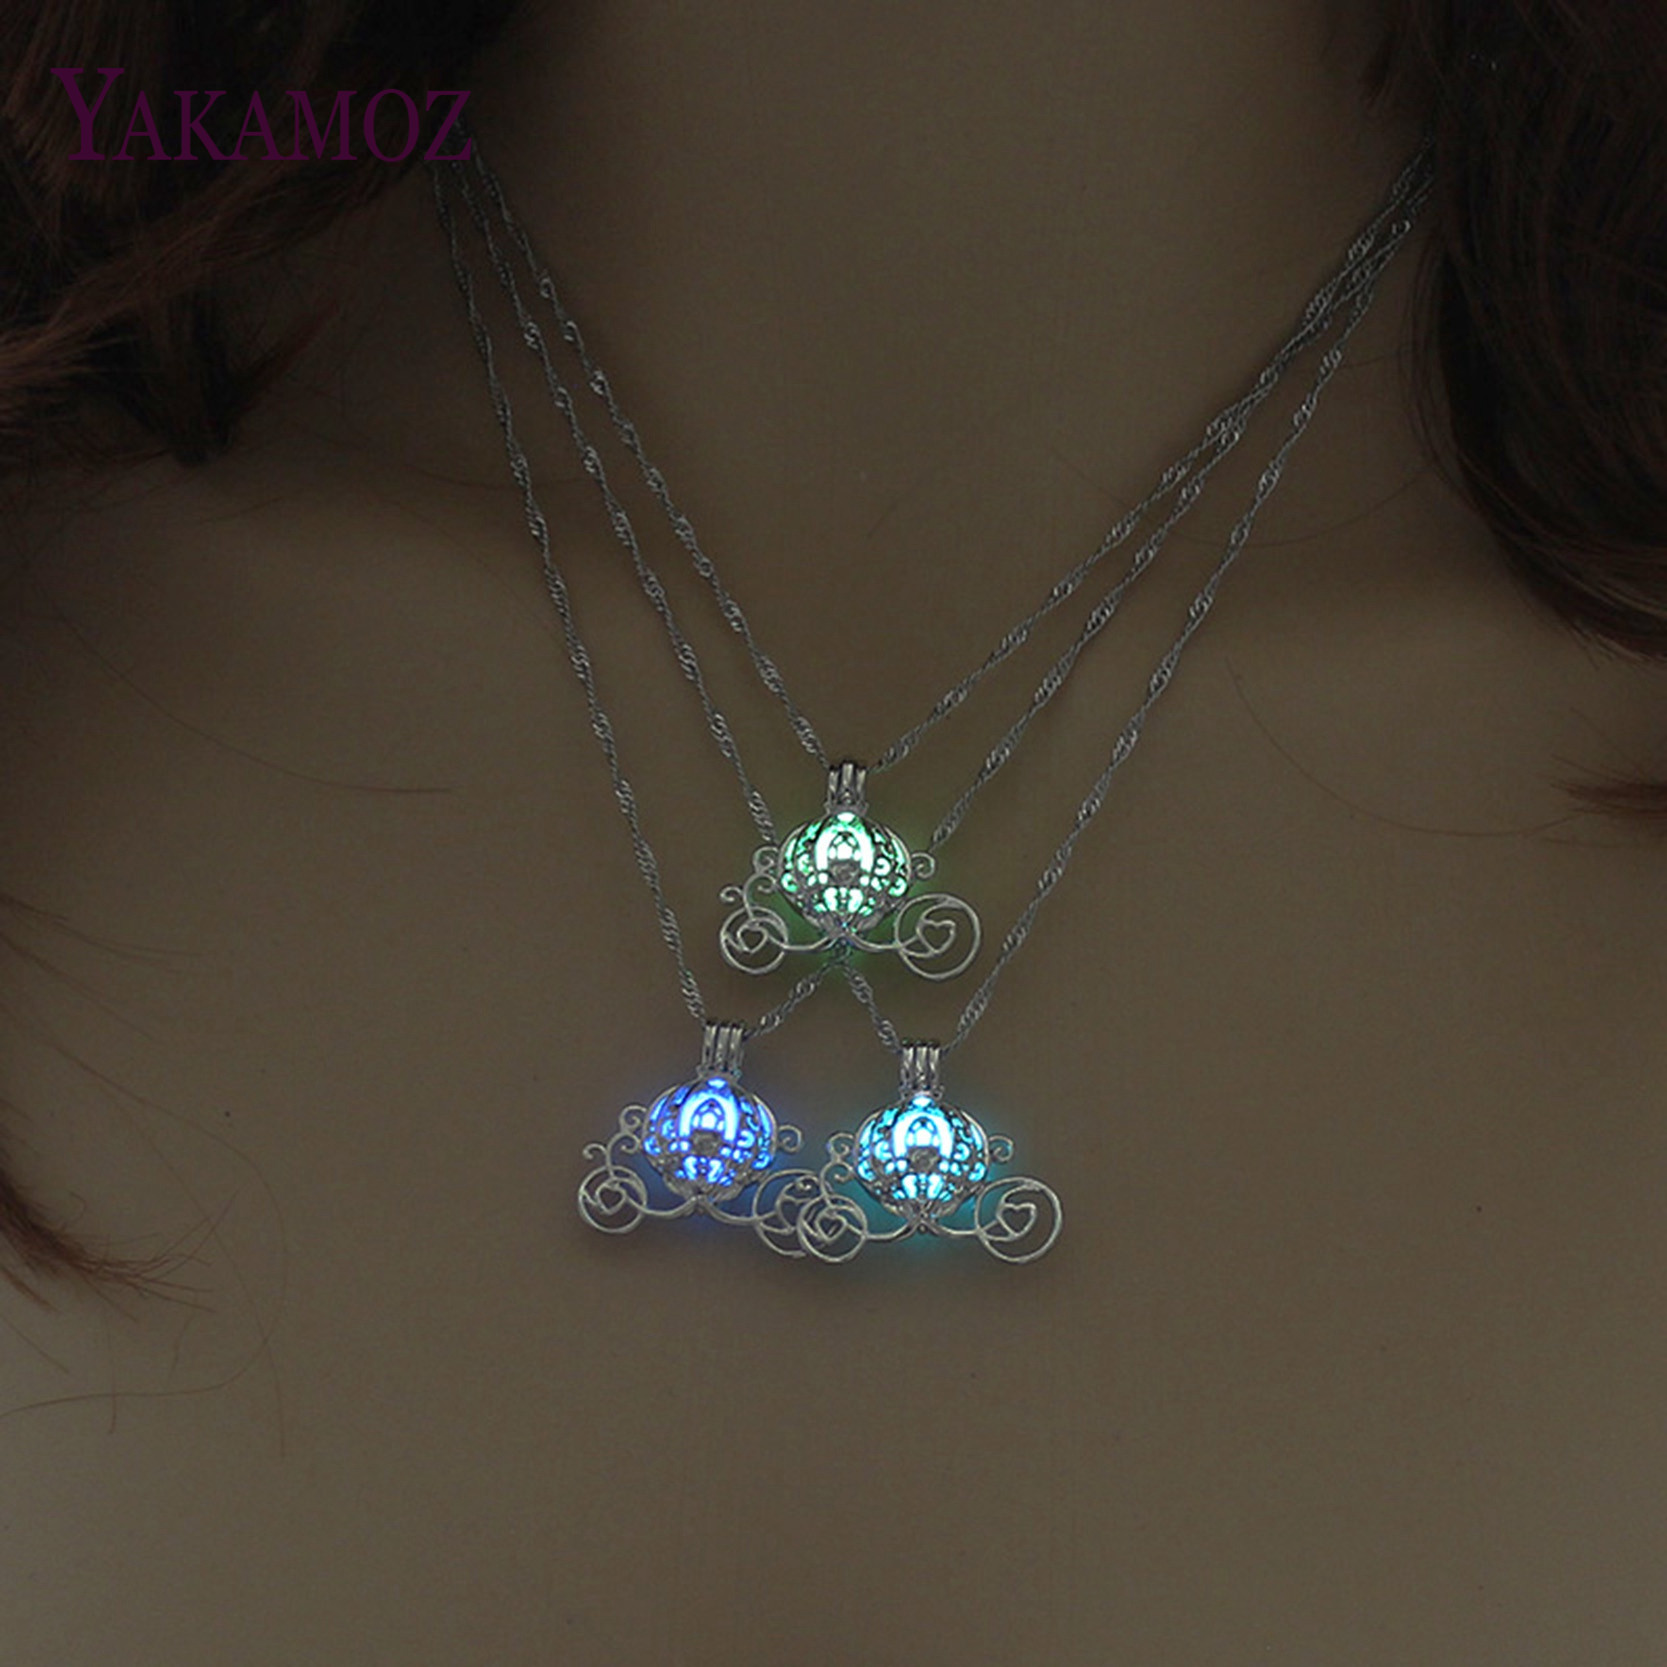 

Fashion Choker Glowing Necklace 3 Colors Luminous Pendant Necklace For Women Best Gift Jewelry Silver Color Chain 45cm